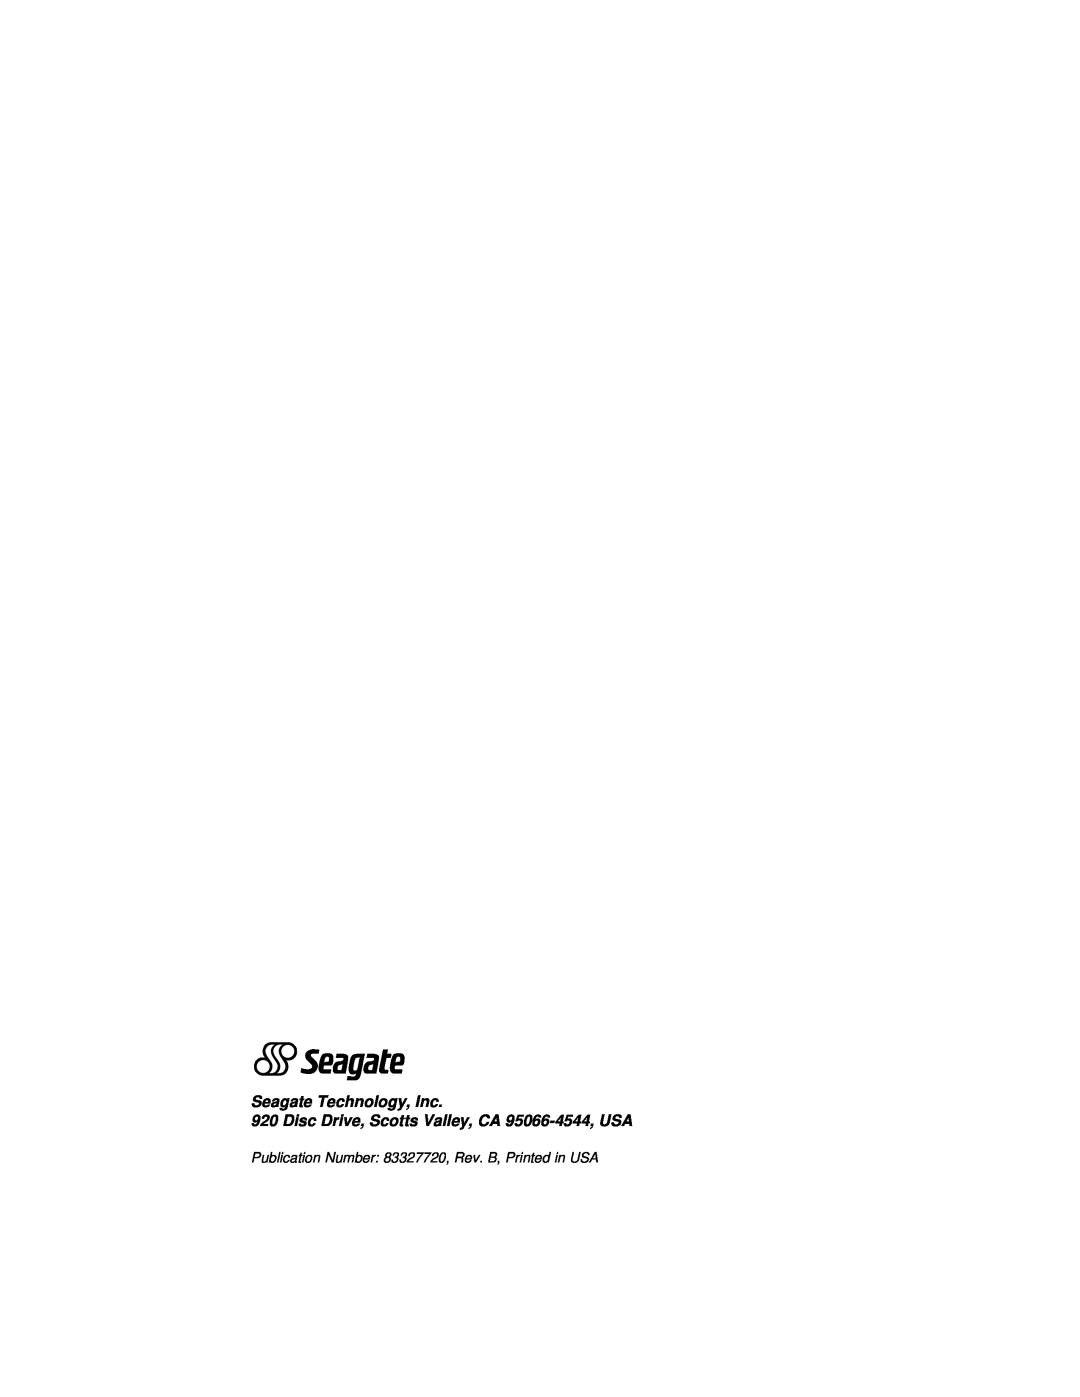 Seagate ST43402ND, ST43401N/ND user manual Seagate Technology, Inc, Disc Drive, Scotts Valley, CA 95066-4544, USA 